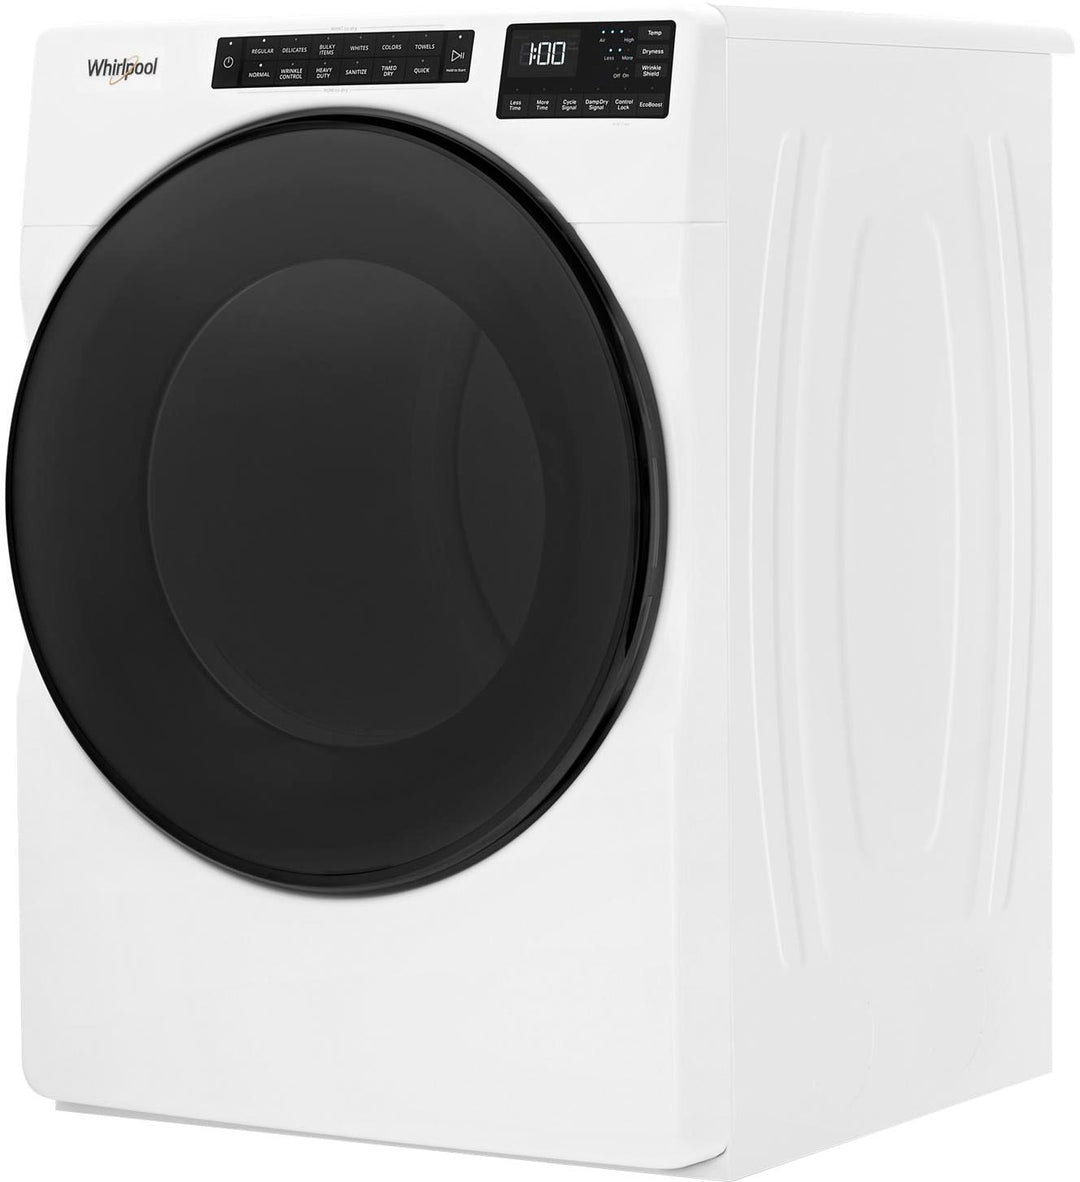 Whirlpool - 7.4 Cu. Ft. Stackable Electric Dryer with Wrinkle Shield - White_6